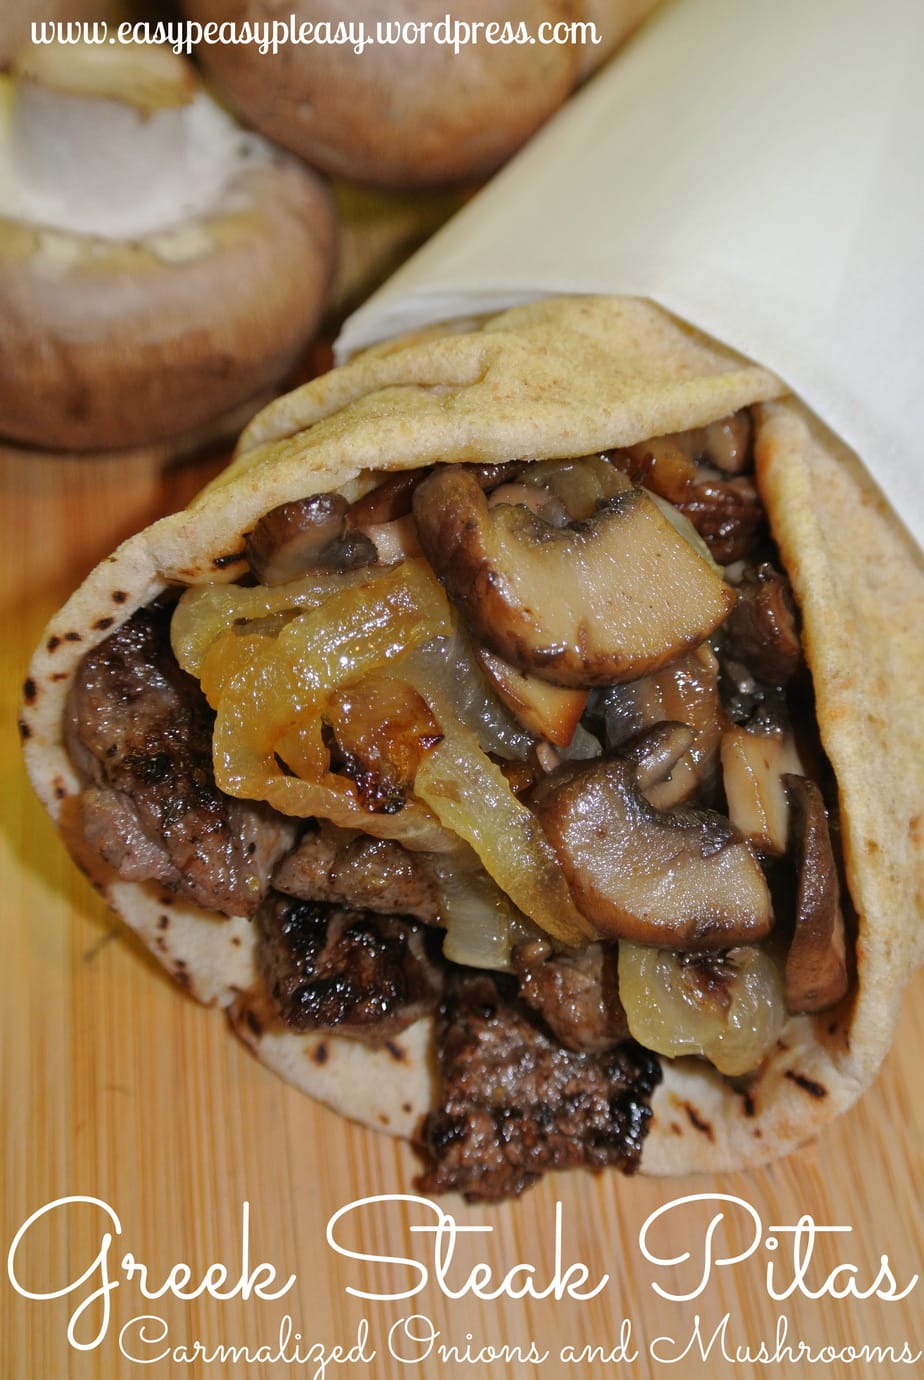 Greek Steak Pitas with Carmalized Onions and Mushrooms is the most requested meal from my husband